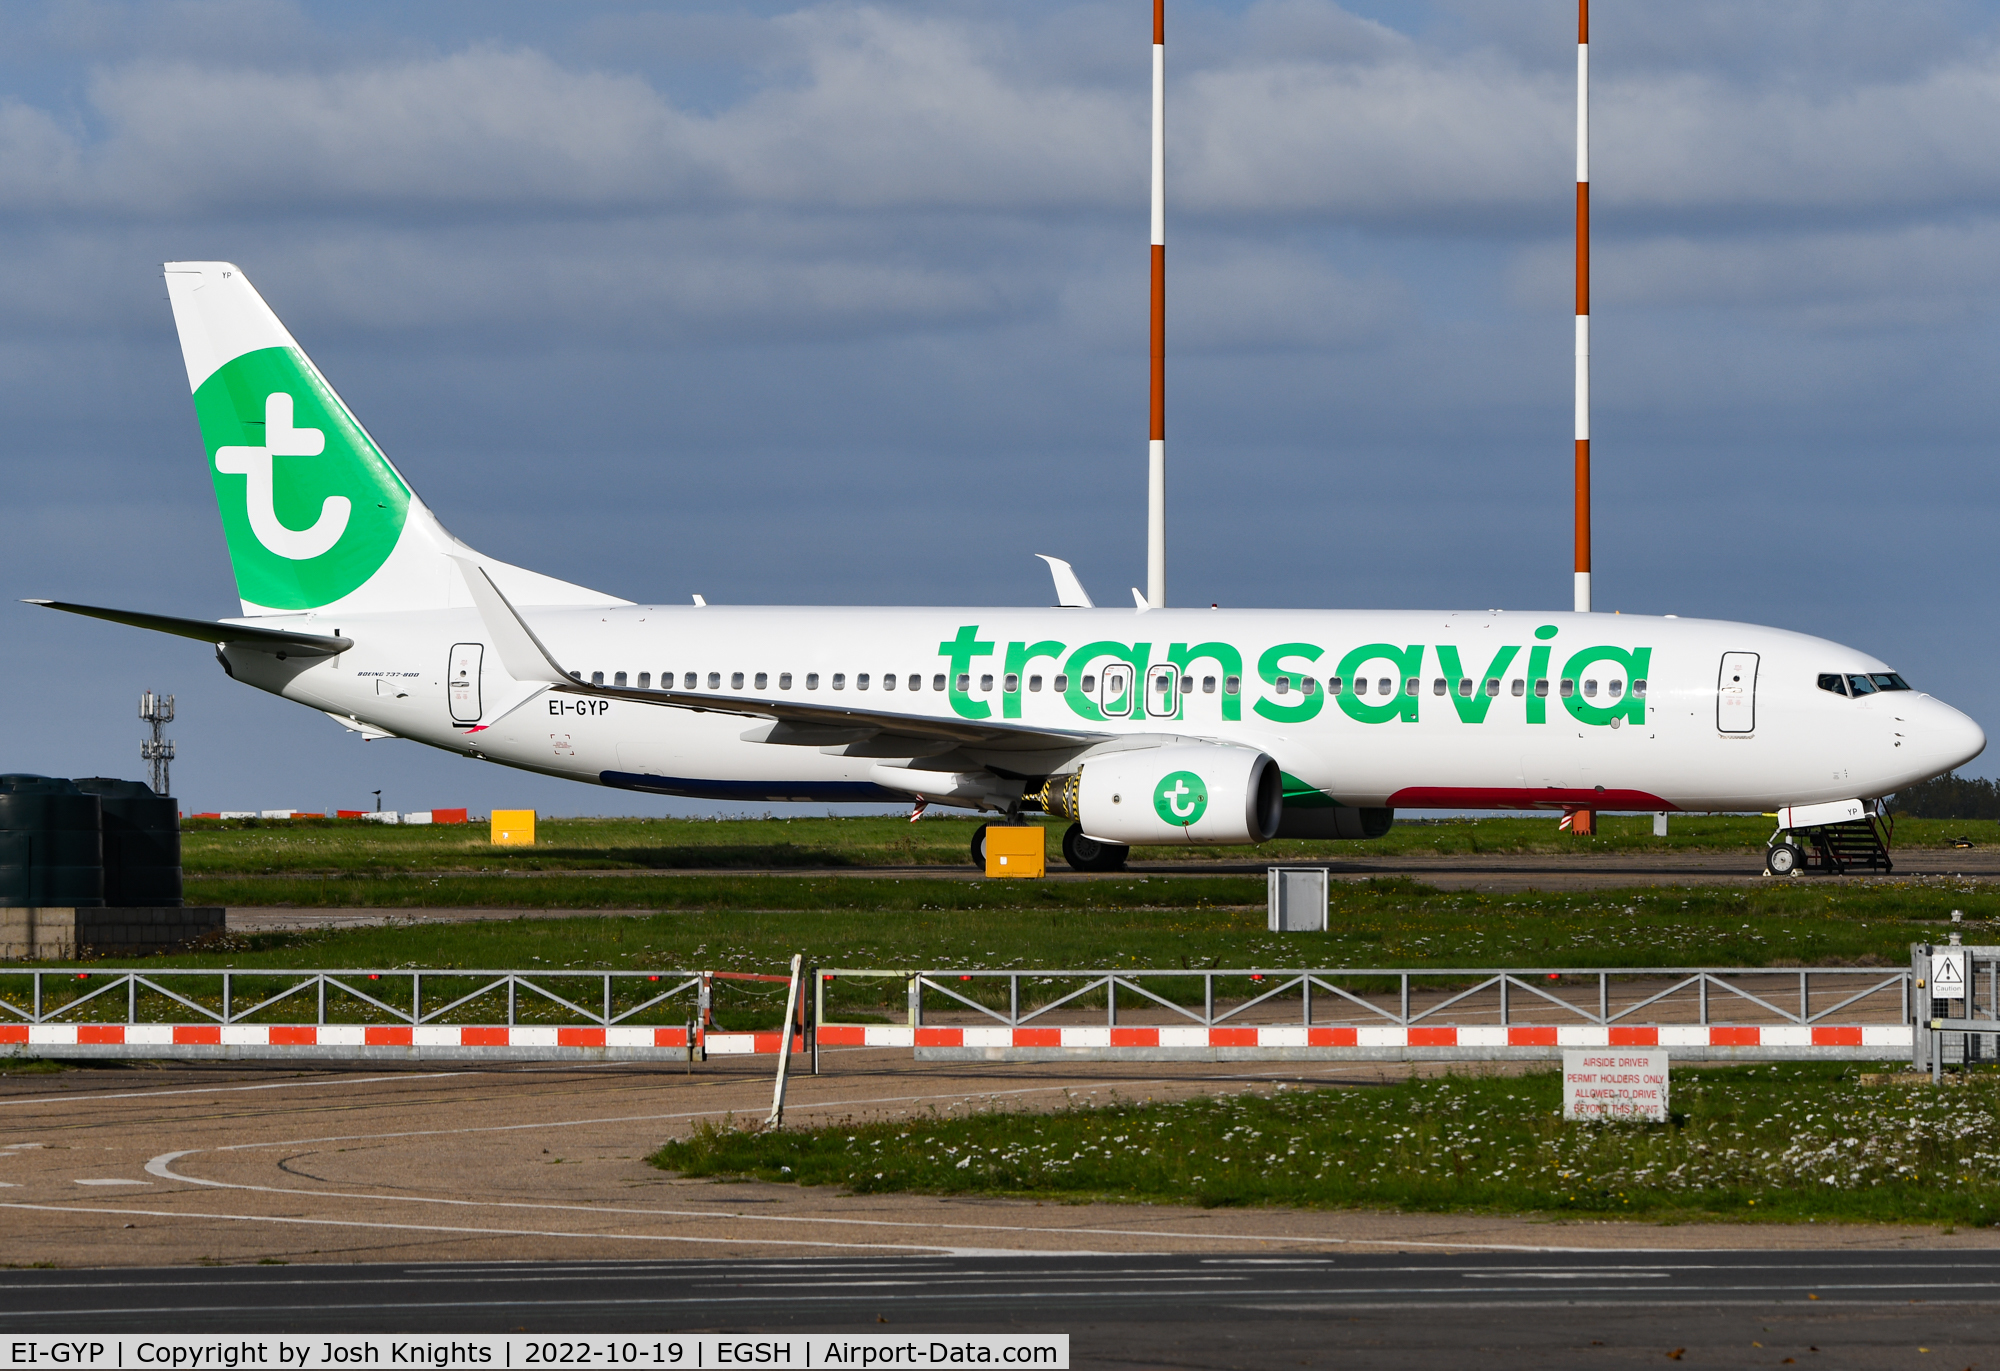 EI-GYP, 2008 Boeing 737-8K5 C/N 35137, On The Eastern Maintenance Apron After Respray Into The Transavia Livery.